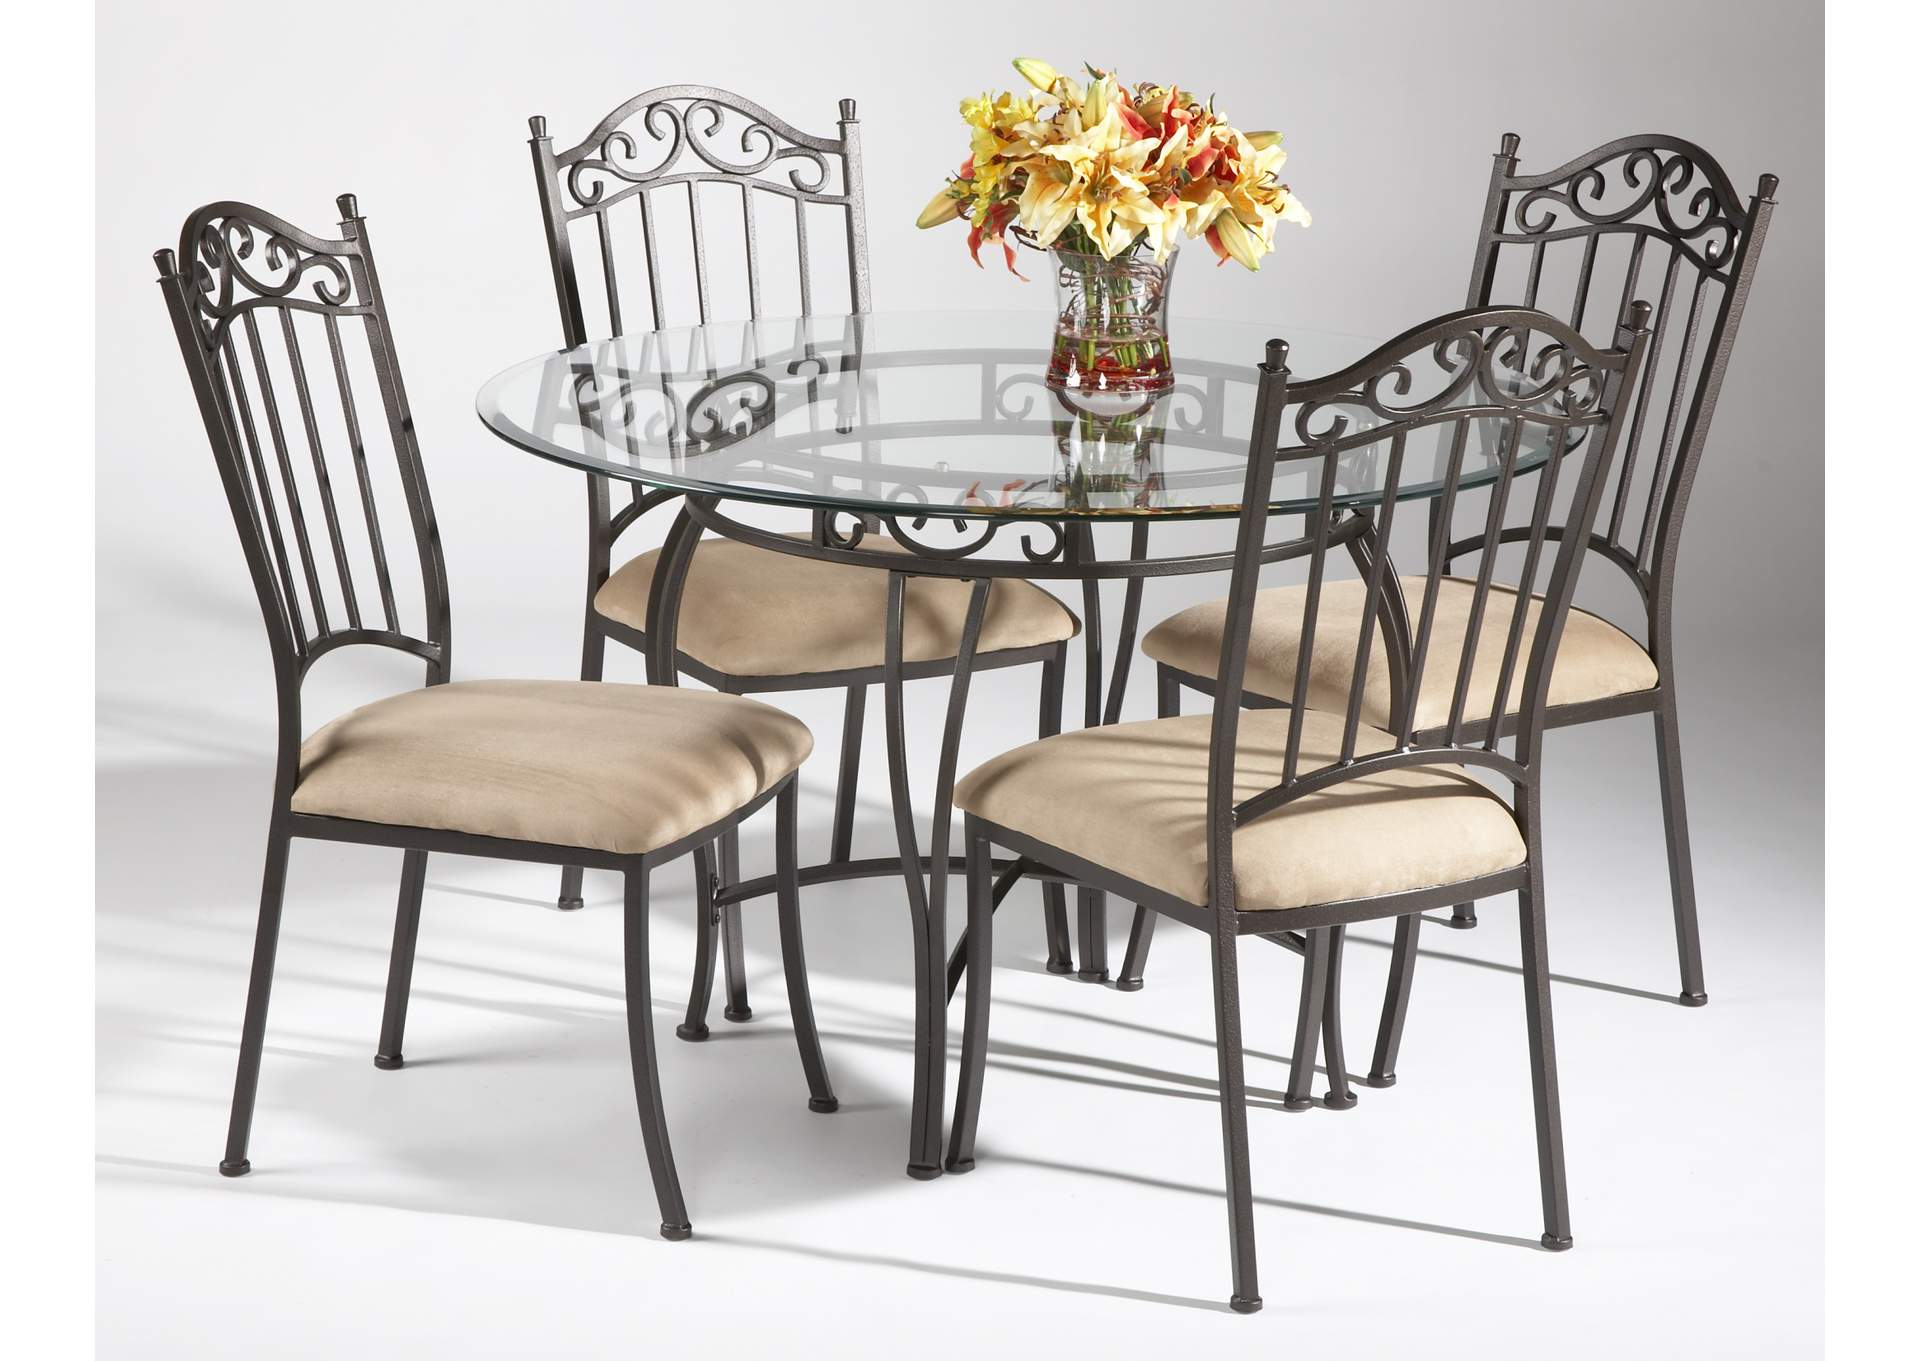 Antique Taupe Transitional Style Dining Set with Wrought Iron Glass Table & Chairs,Chintaly Imports